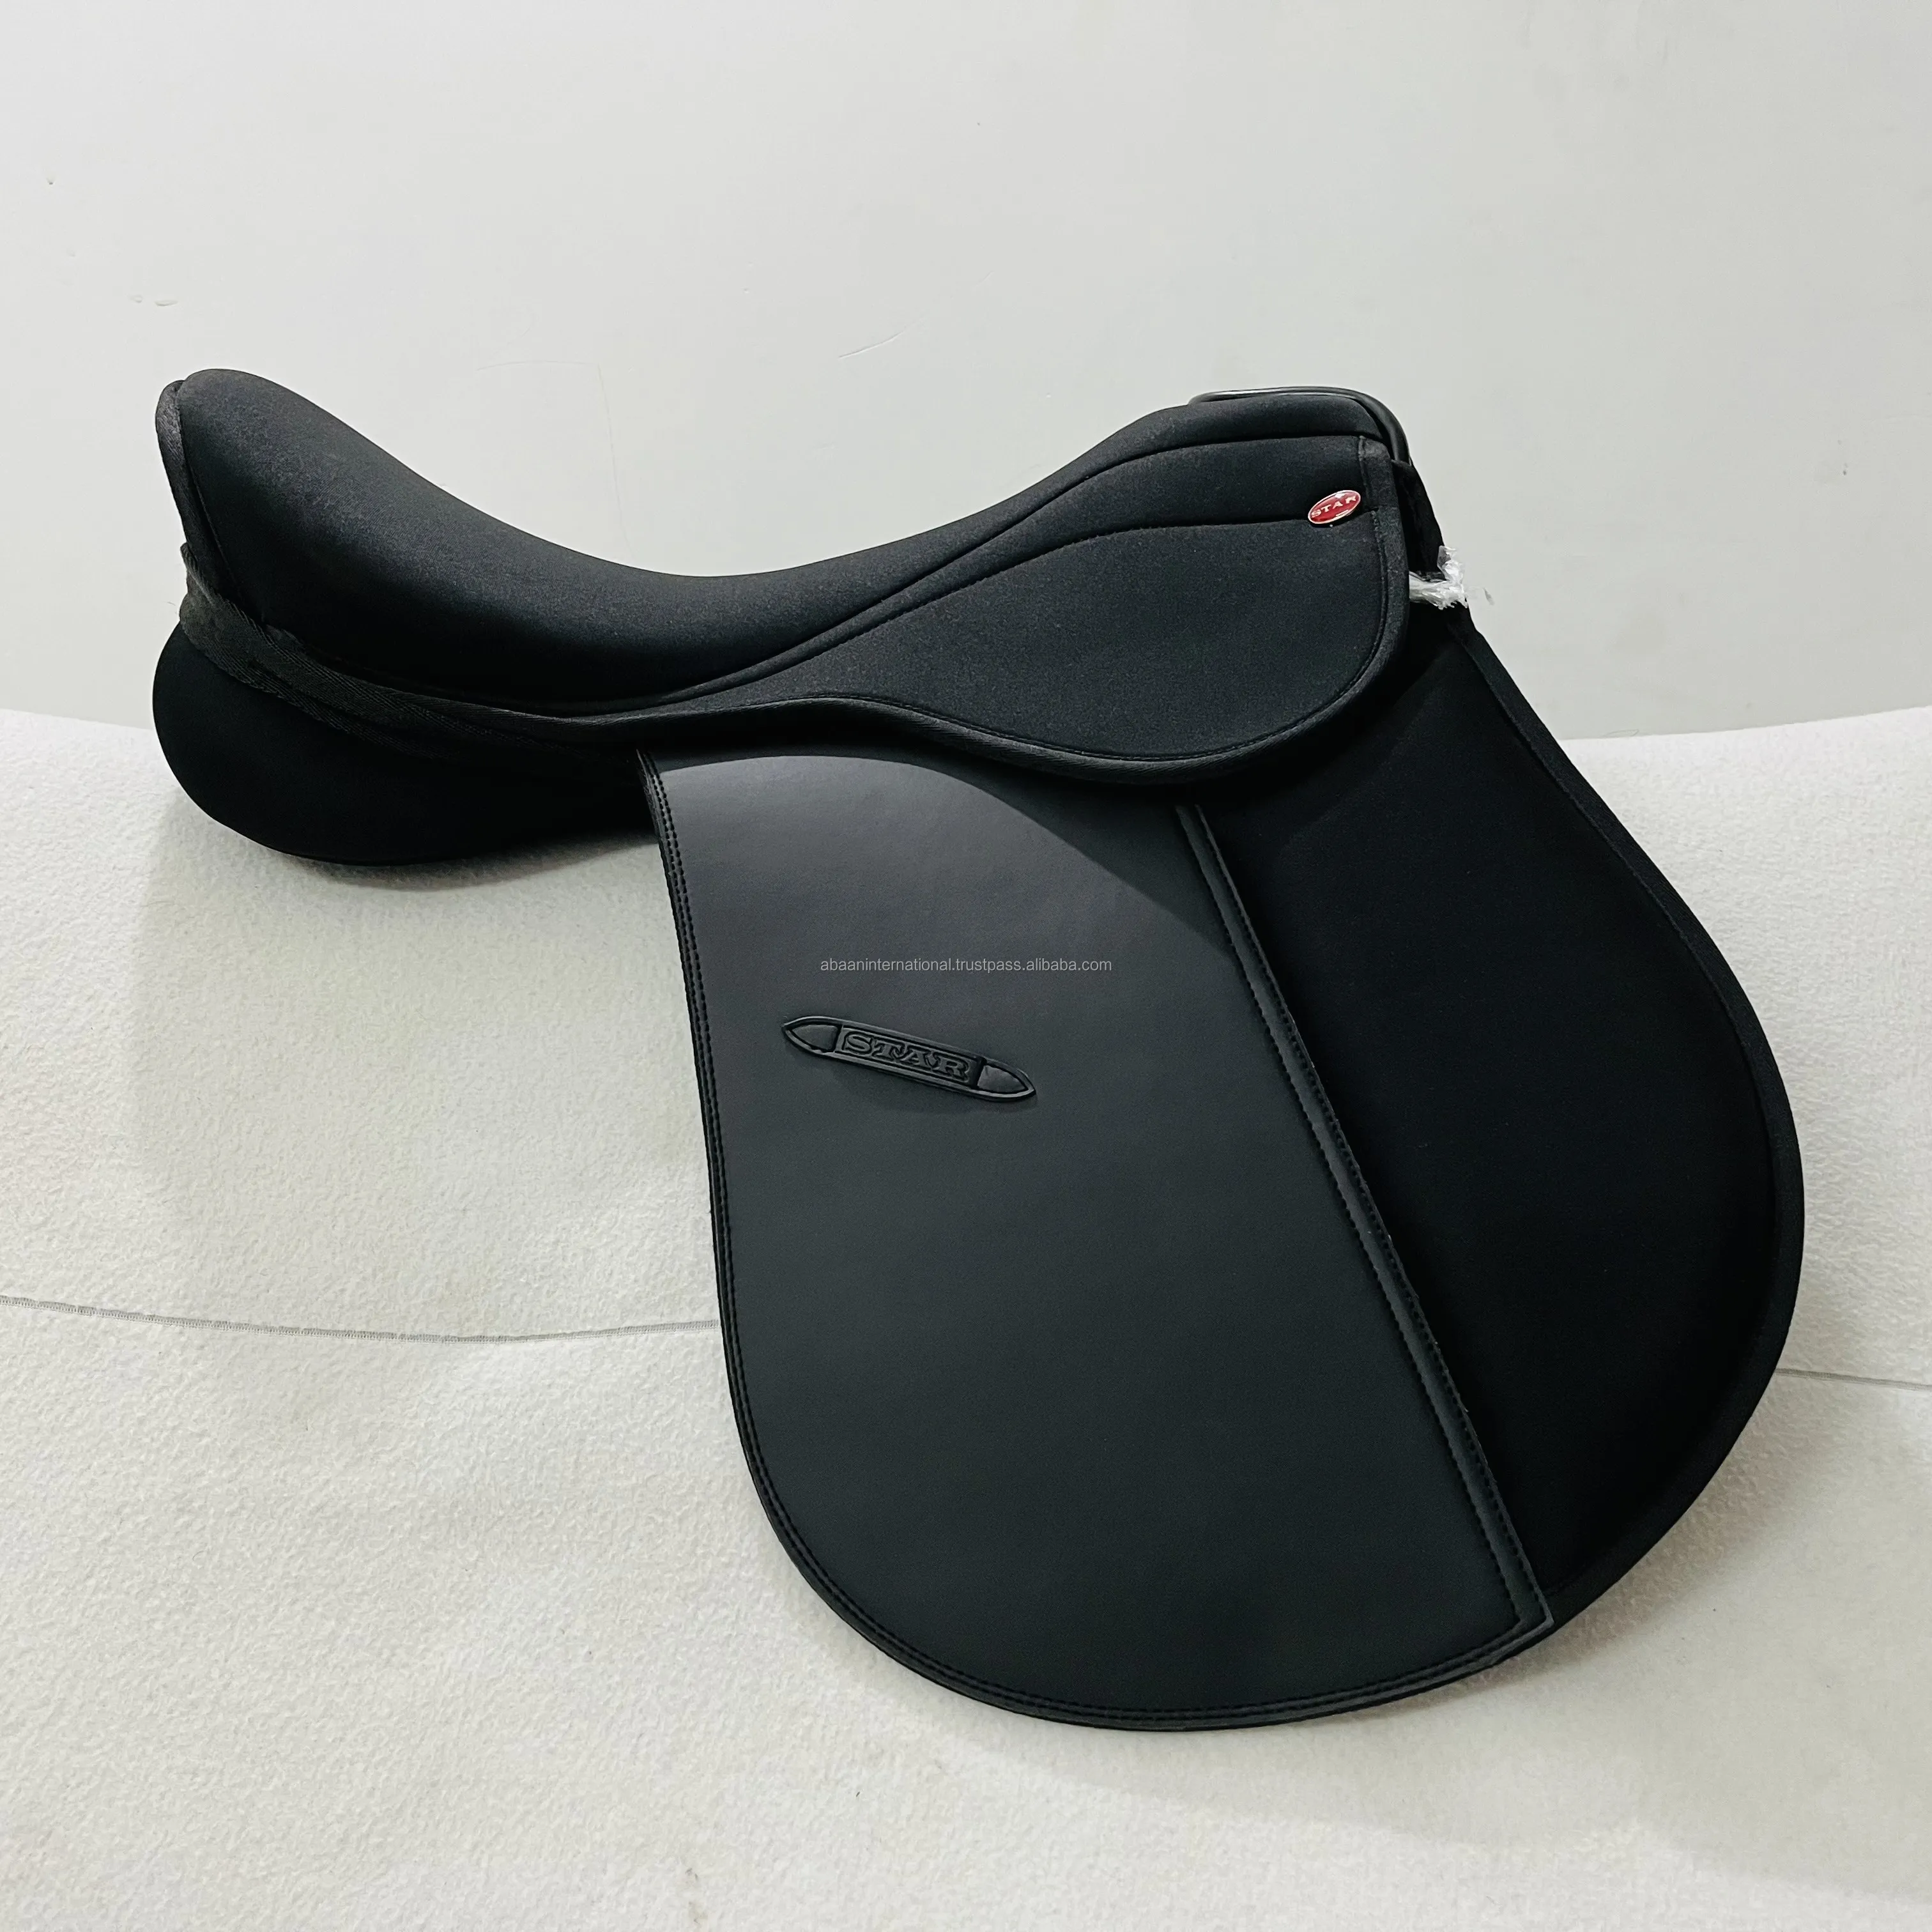 HORSE STAR SADDLE HIGH QUALITY NEW BEST DESIGN 100% OEM CUSTOM LOGO, COLOR AND SIZES AT LOWEST PRICE